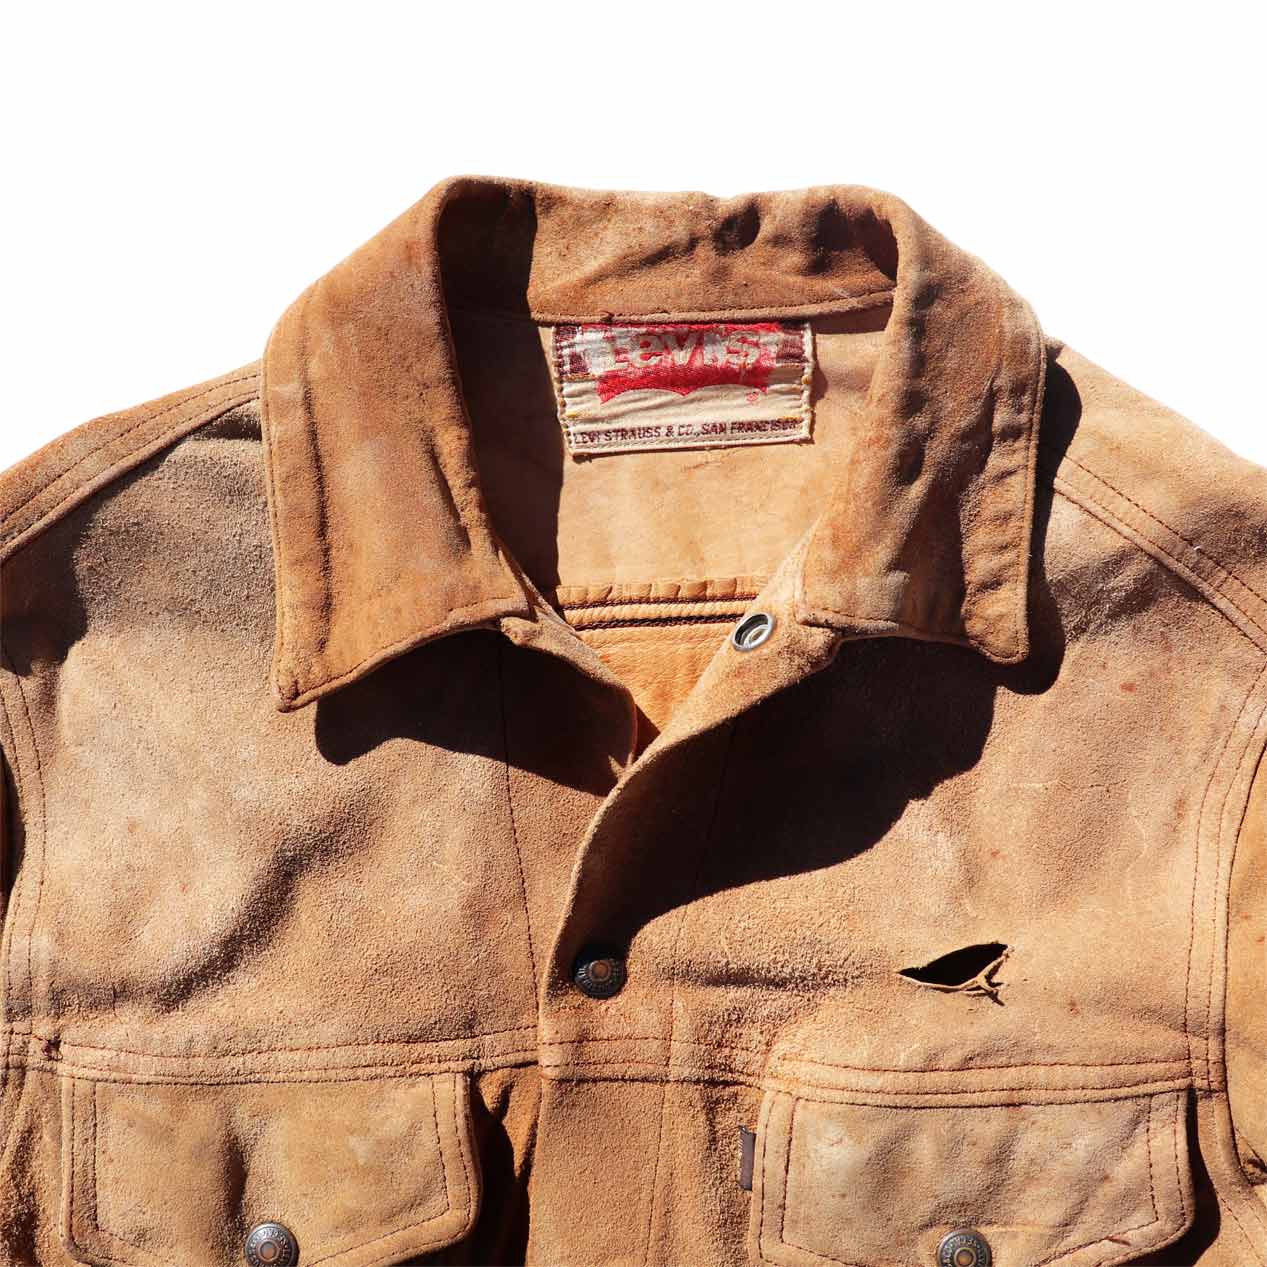 POST JUNK / 60's～ LEVI'S 70505 BIG-E Suede Leather Jacket [About 40]